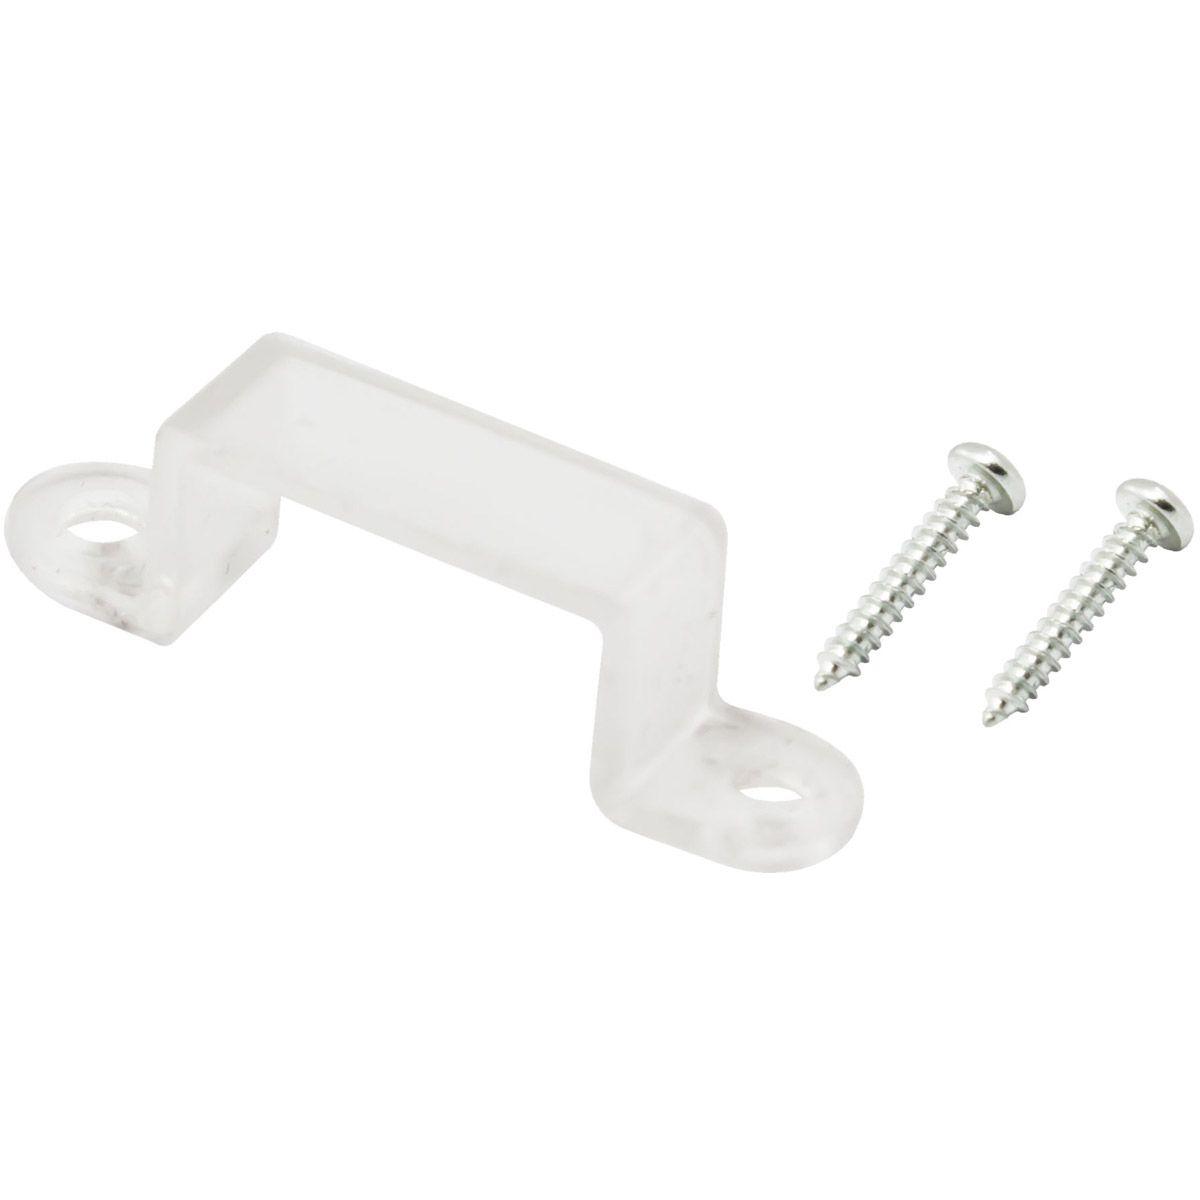 Hybrid 2 Mounting Clips, Pack of 10